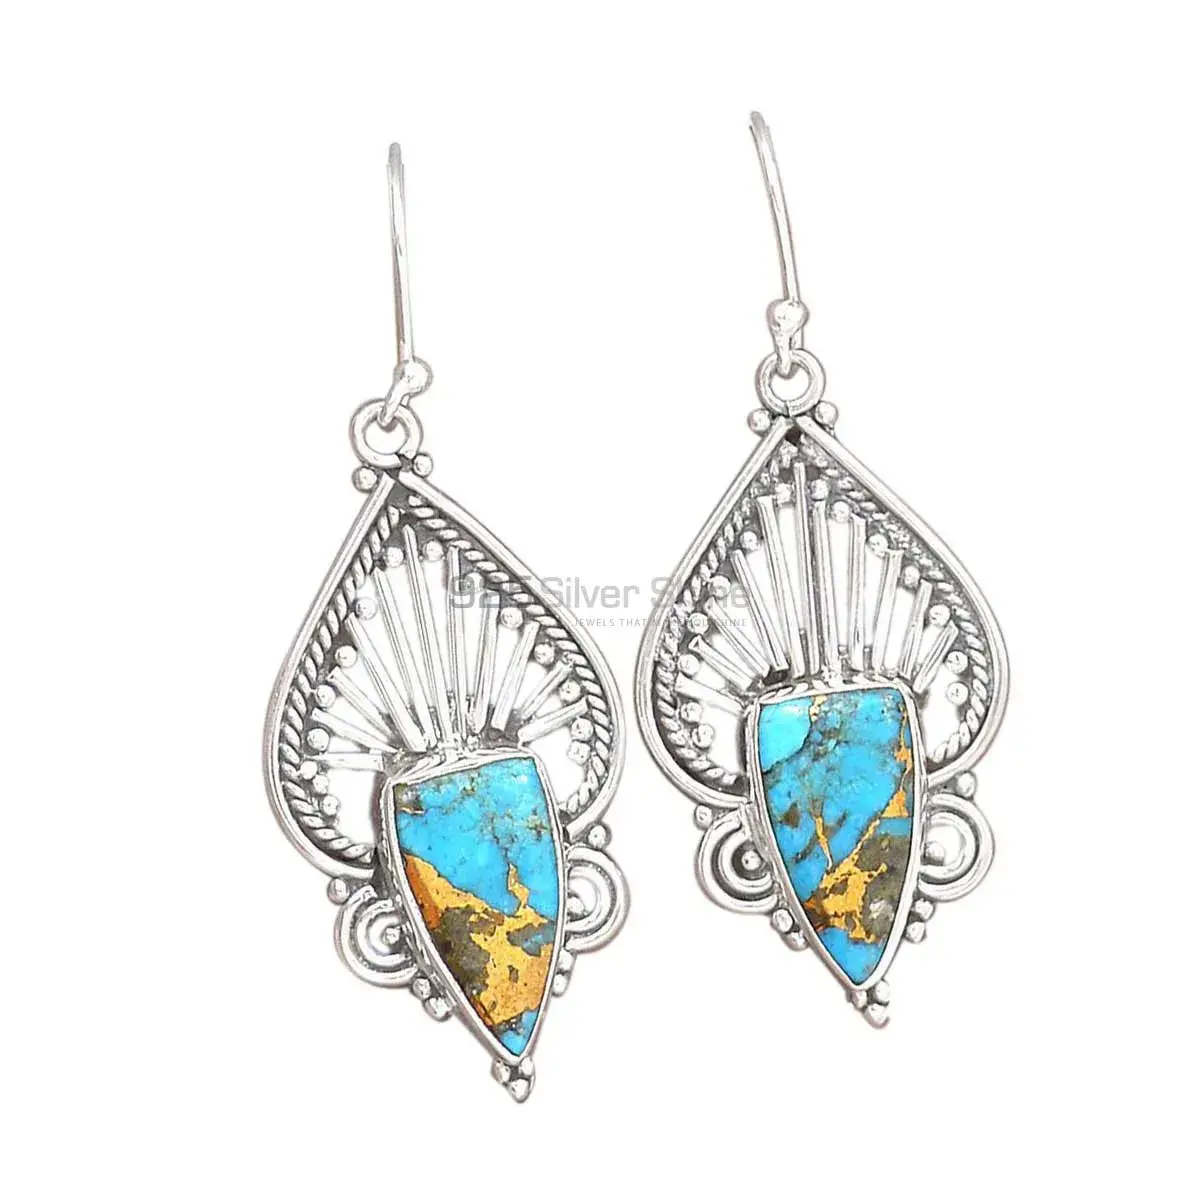 Semi Precious Turquoise Gemstone Earrings In Solid 925 Silver 925SE2656